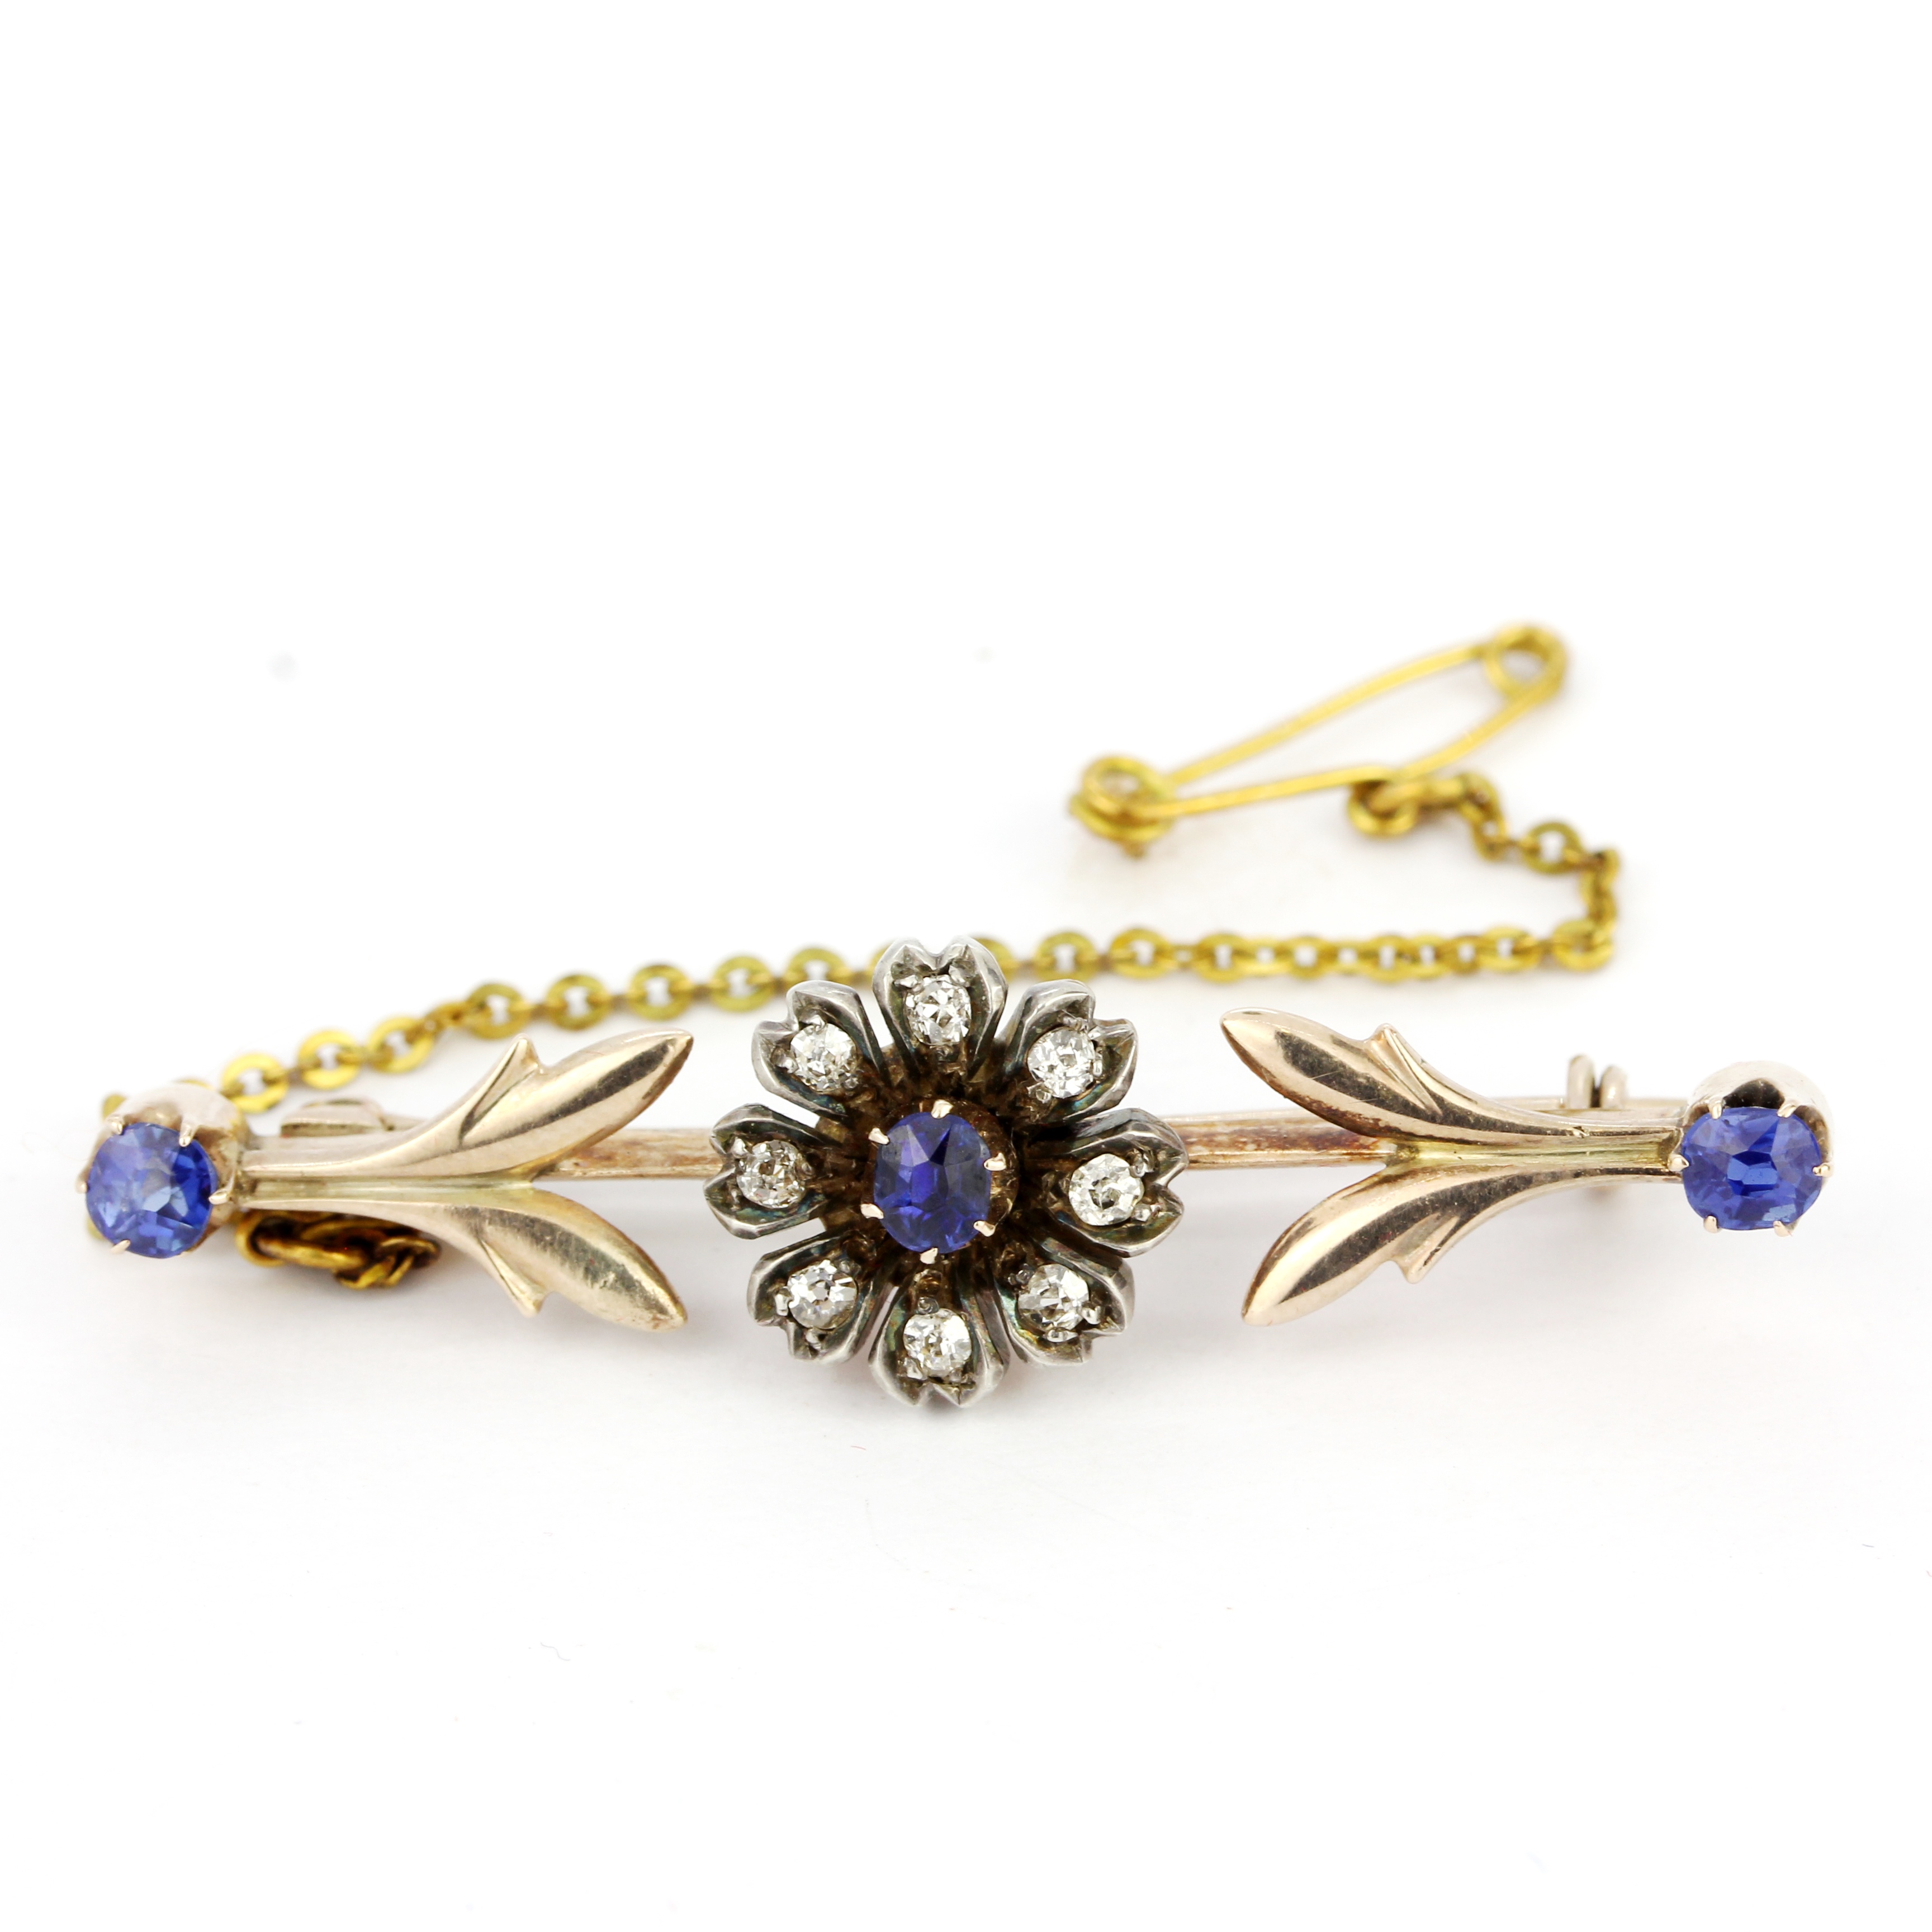 A rose metal (tested minimum 9ct gold) brooch set with sapphires and diamonds, L. 4.5cm.